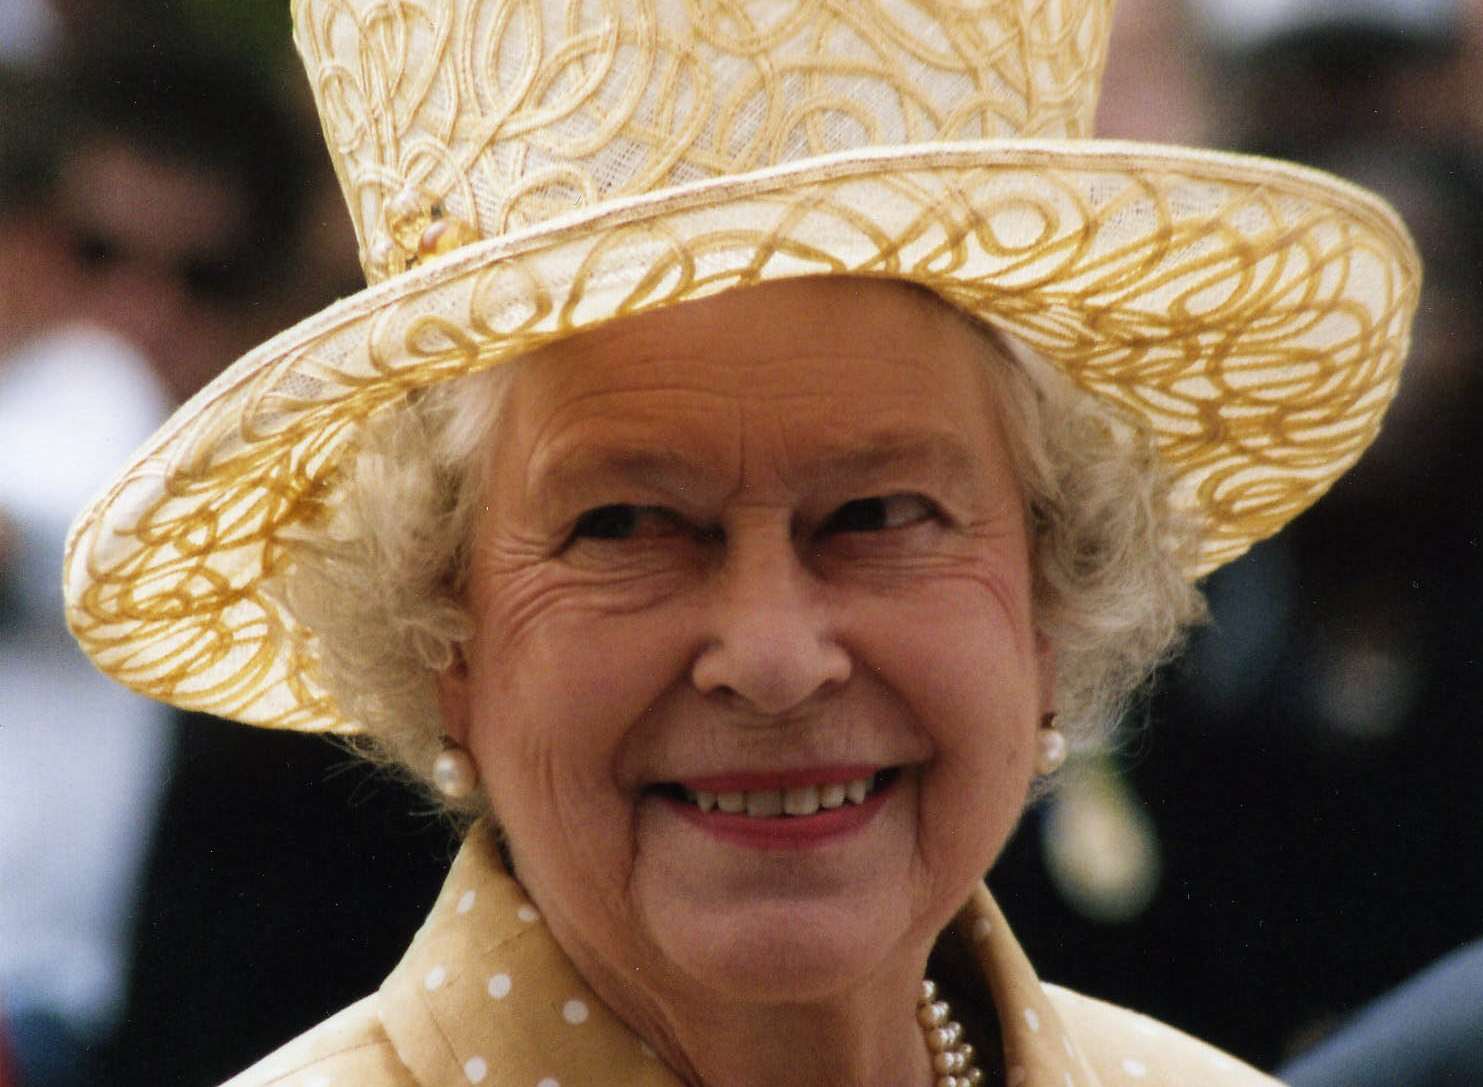 The Queen turns 90 today